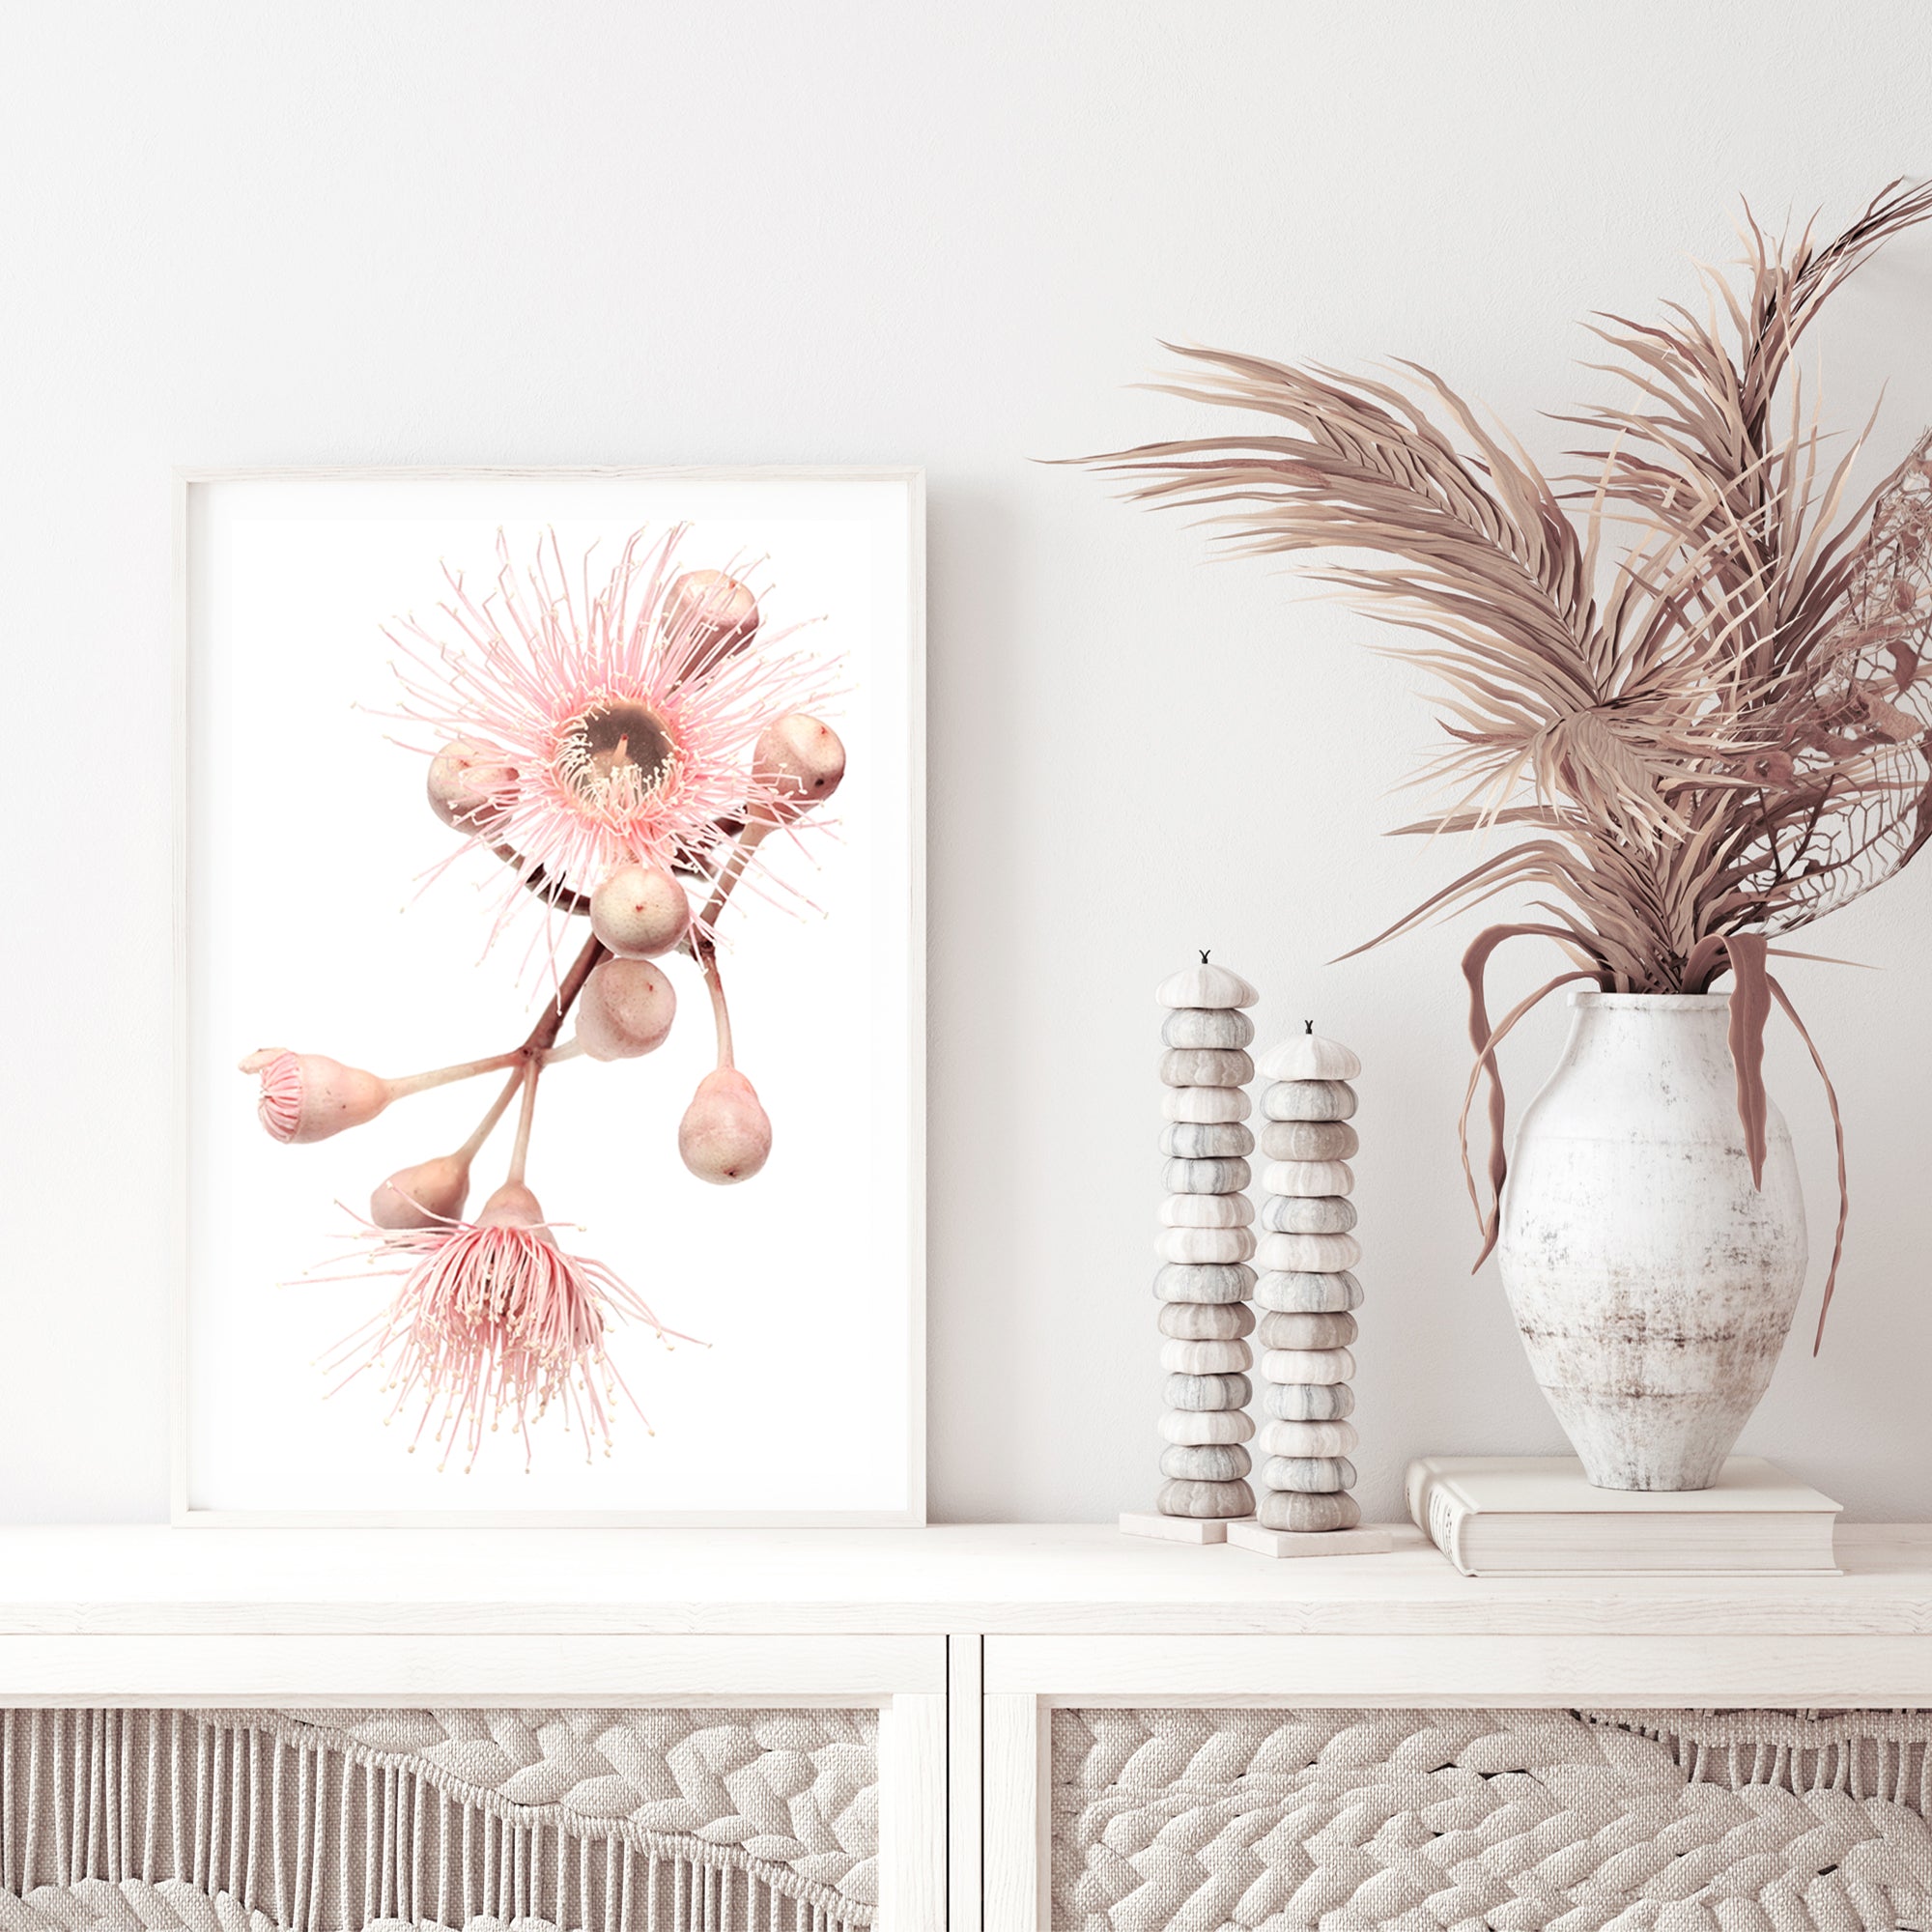 An framed or unframed Australian artwork of green leaves and pink eucalyptus wild flowers with a neutral background.